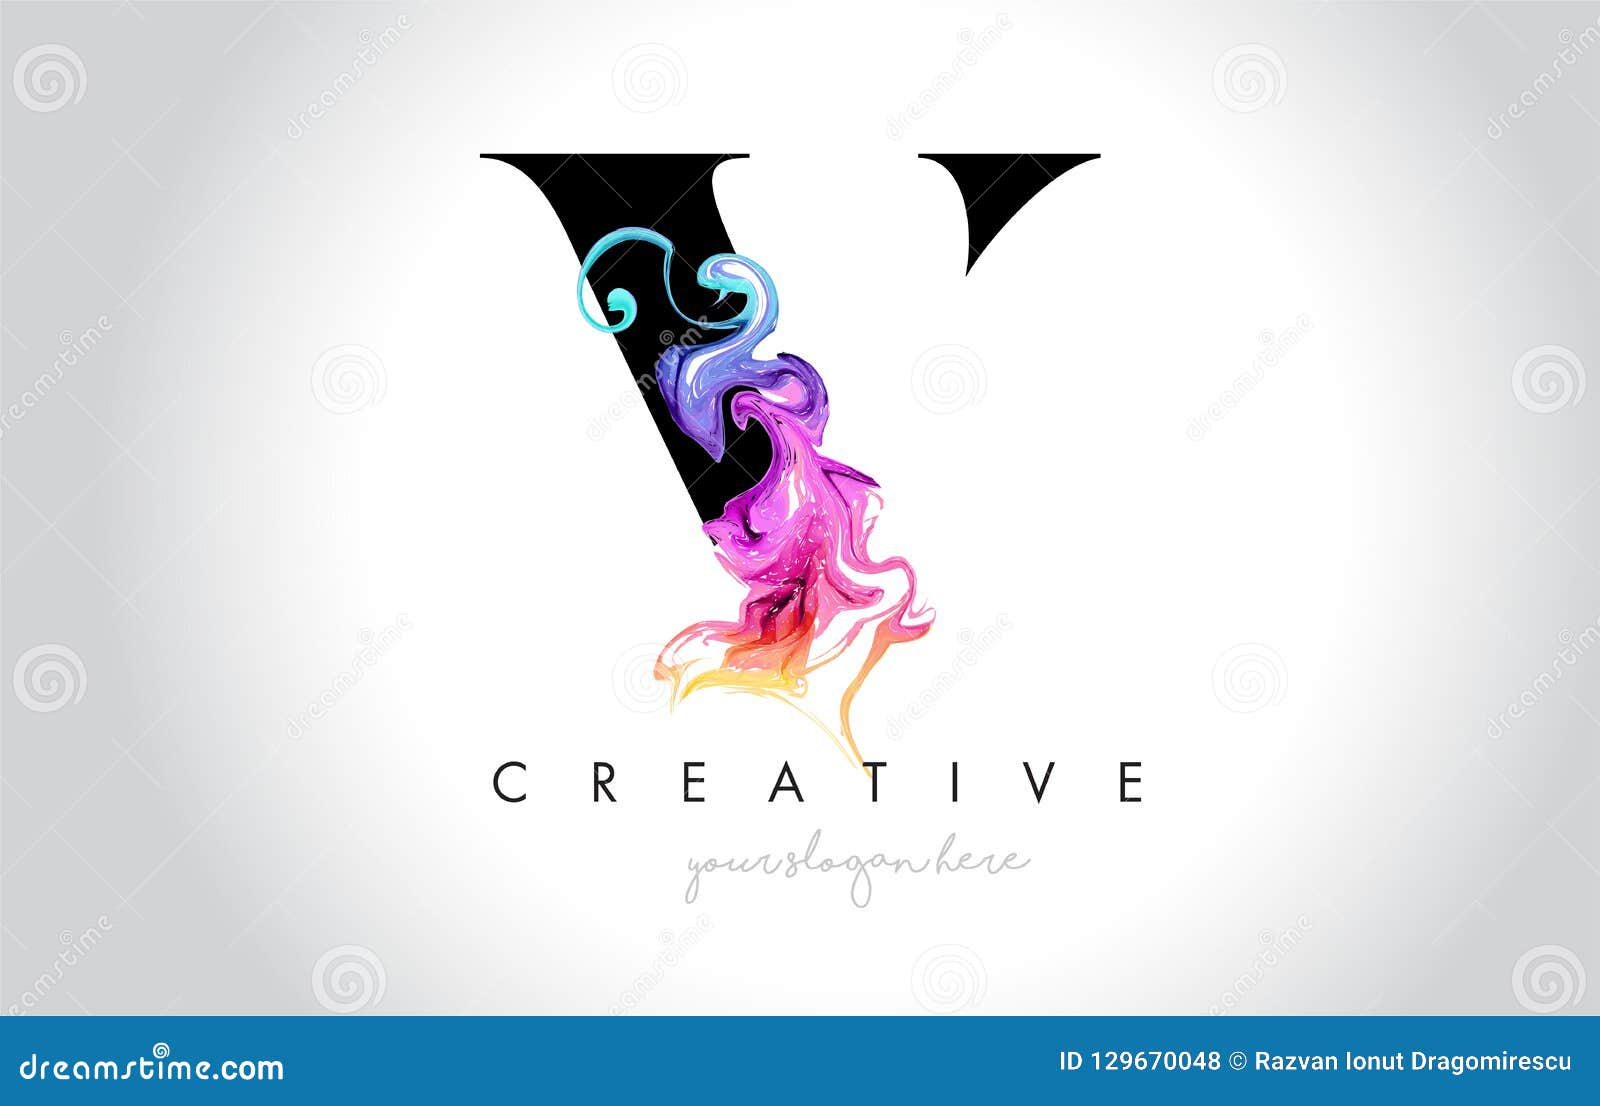 v vibrant creative leter logo  with colorful smoke ink flo